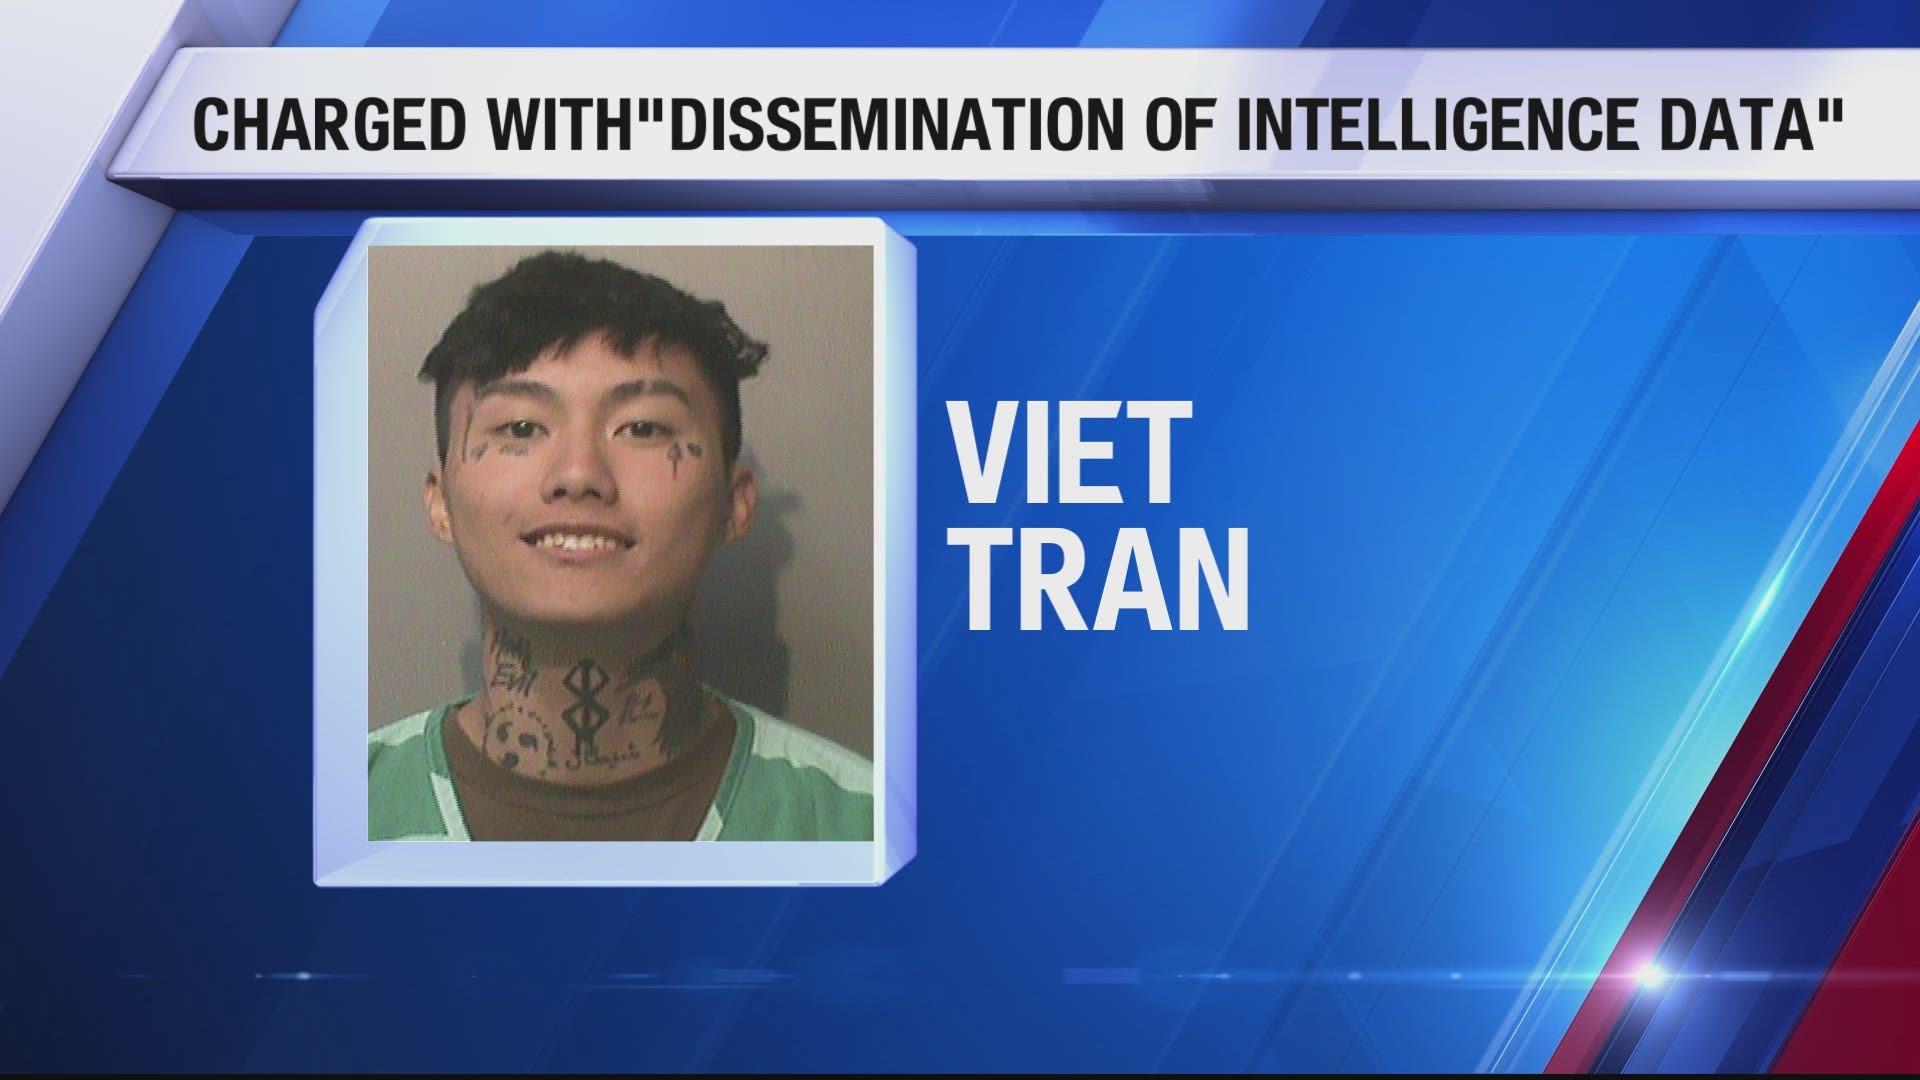 Viet Tran is charged with Dissemination of Intelligence Data.